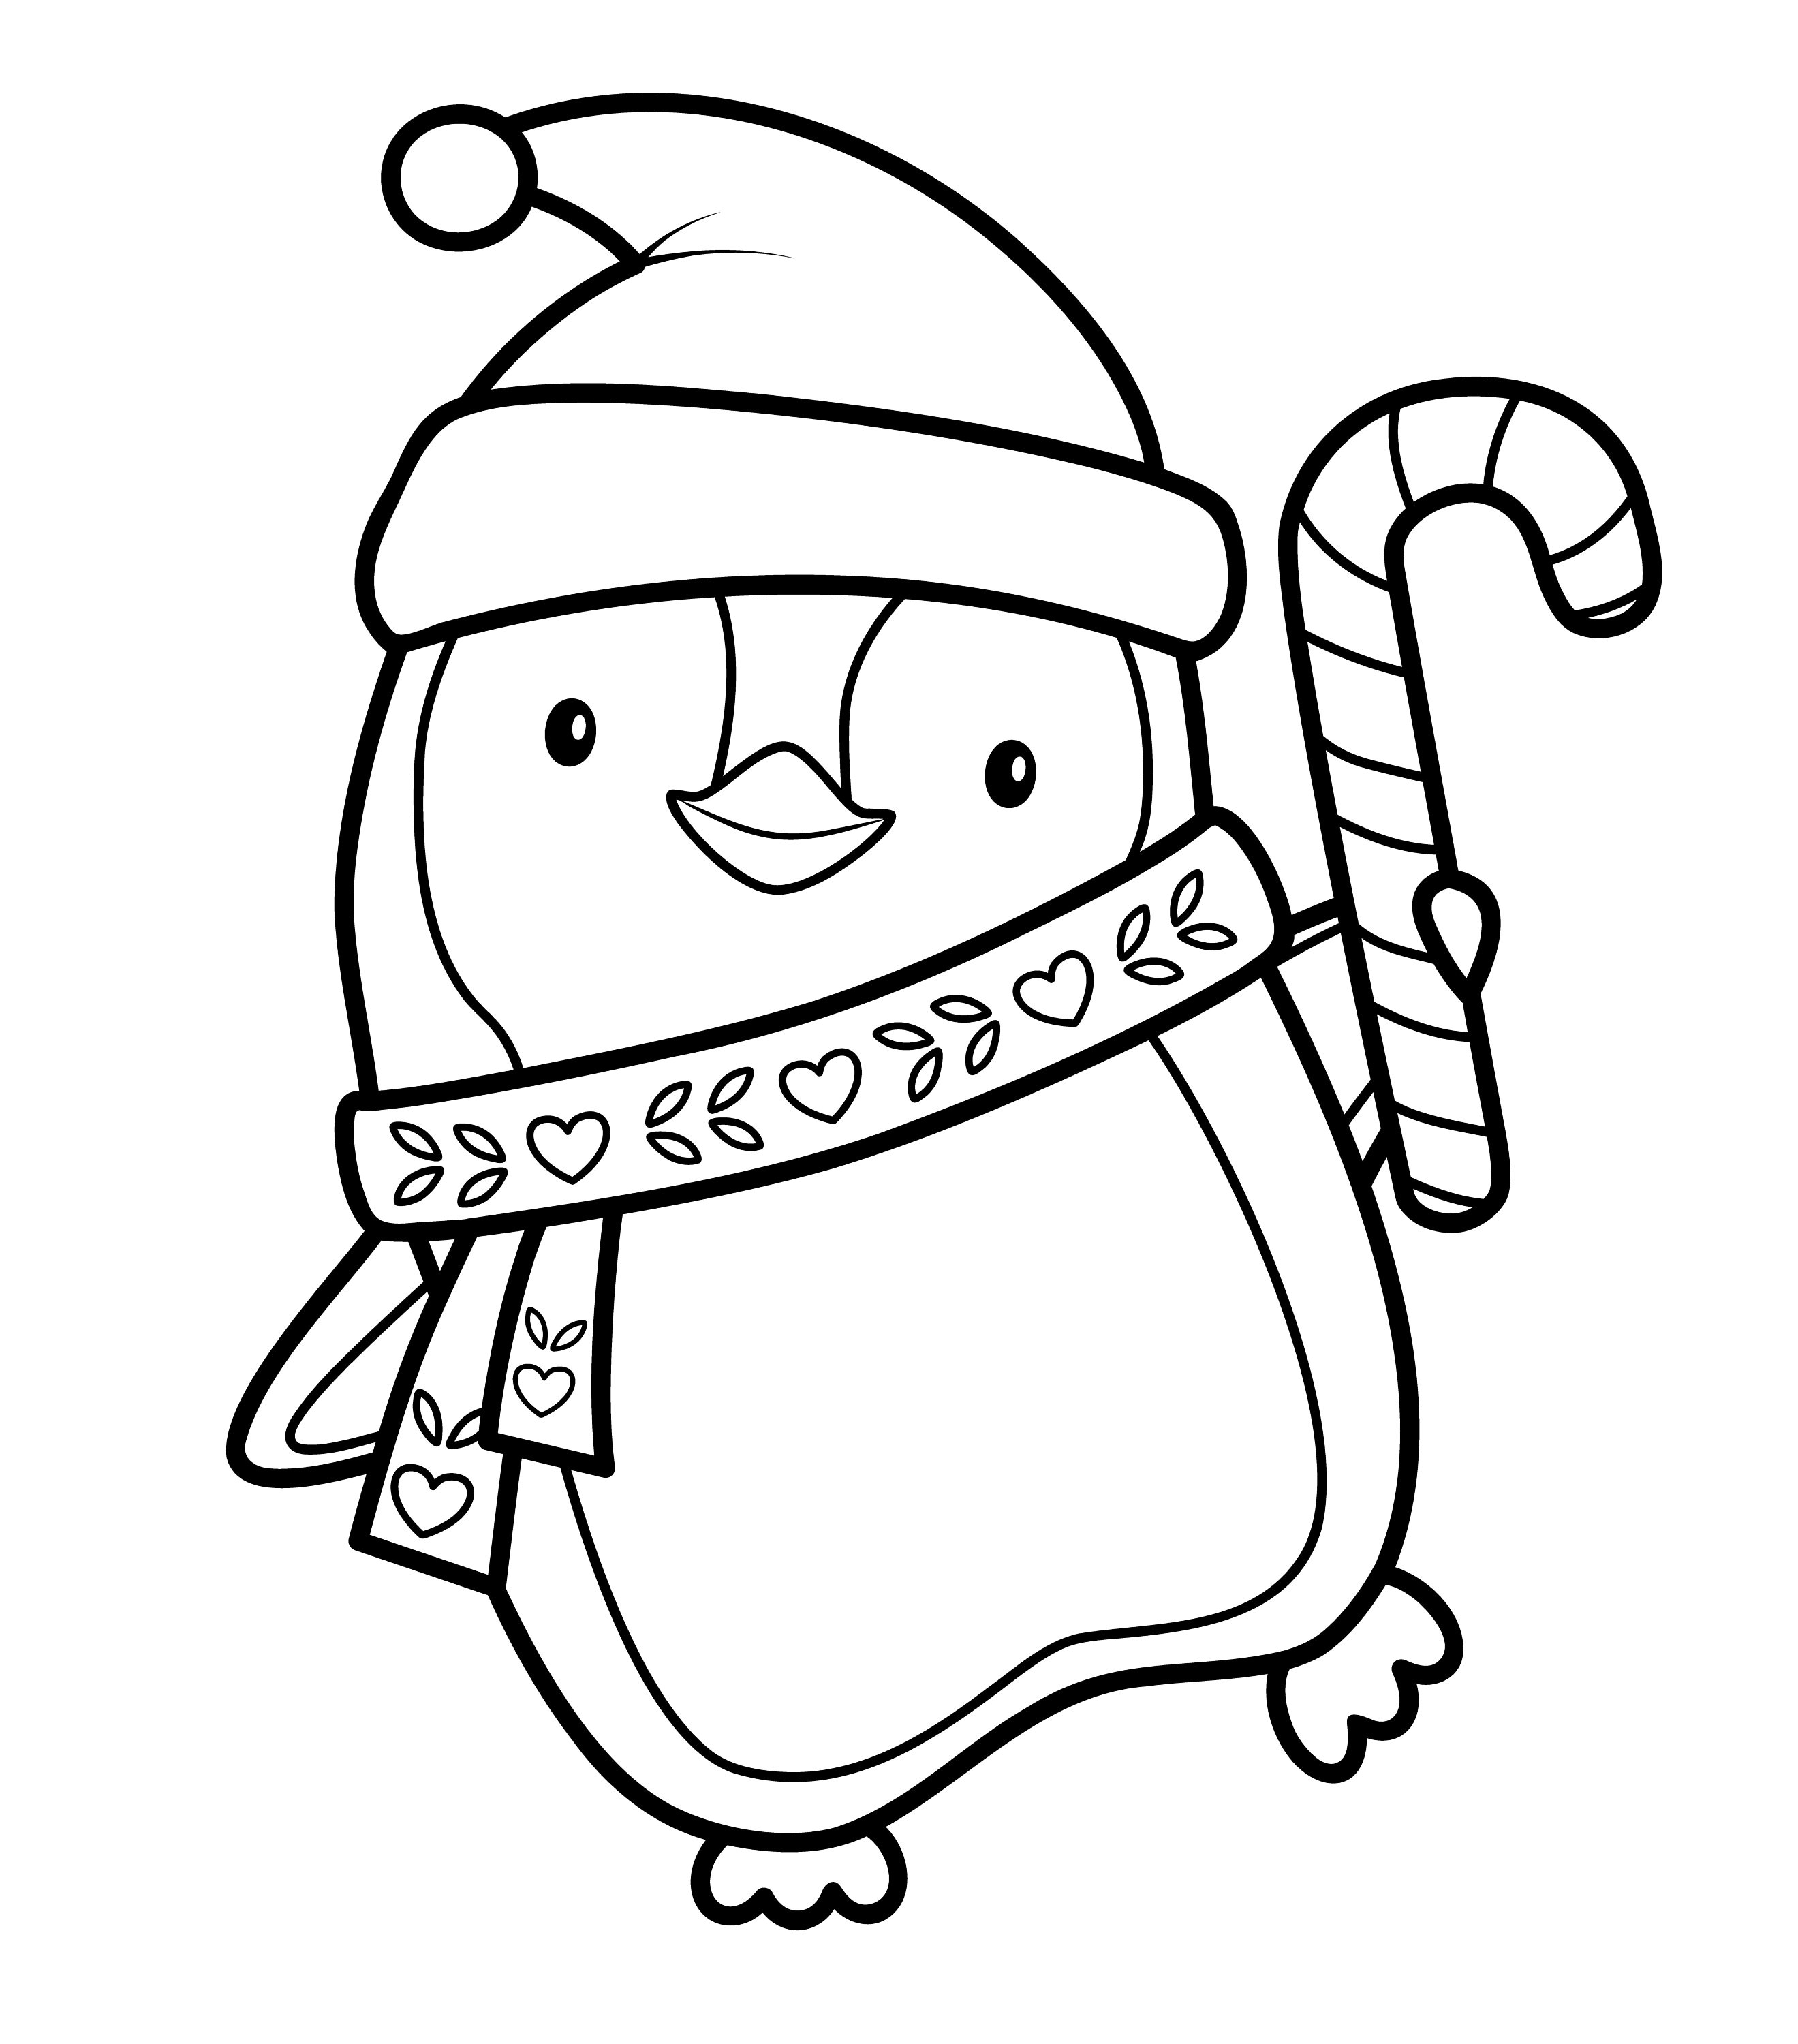 Easy cute christmas coloring book pages for kids